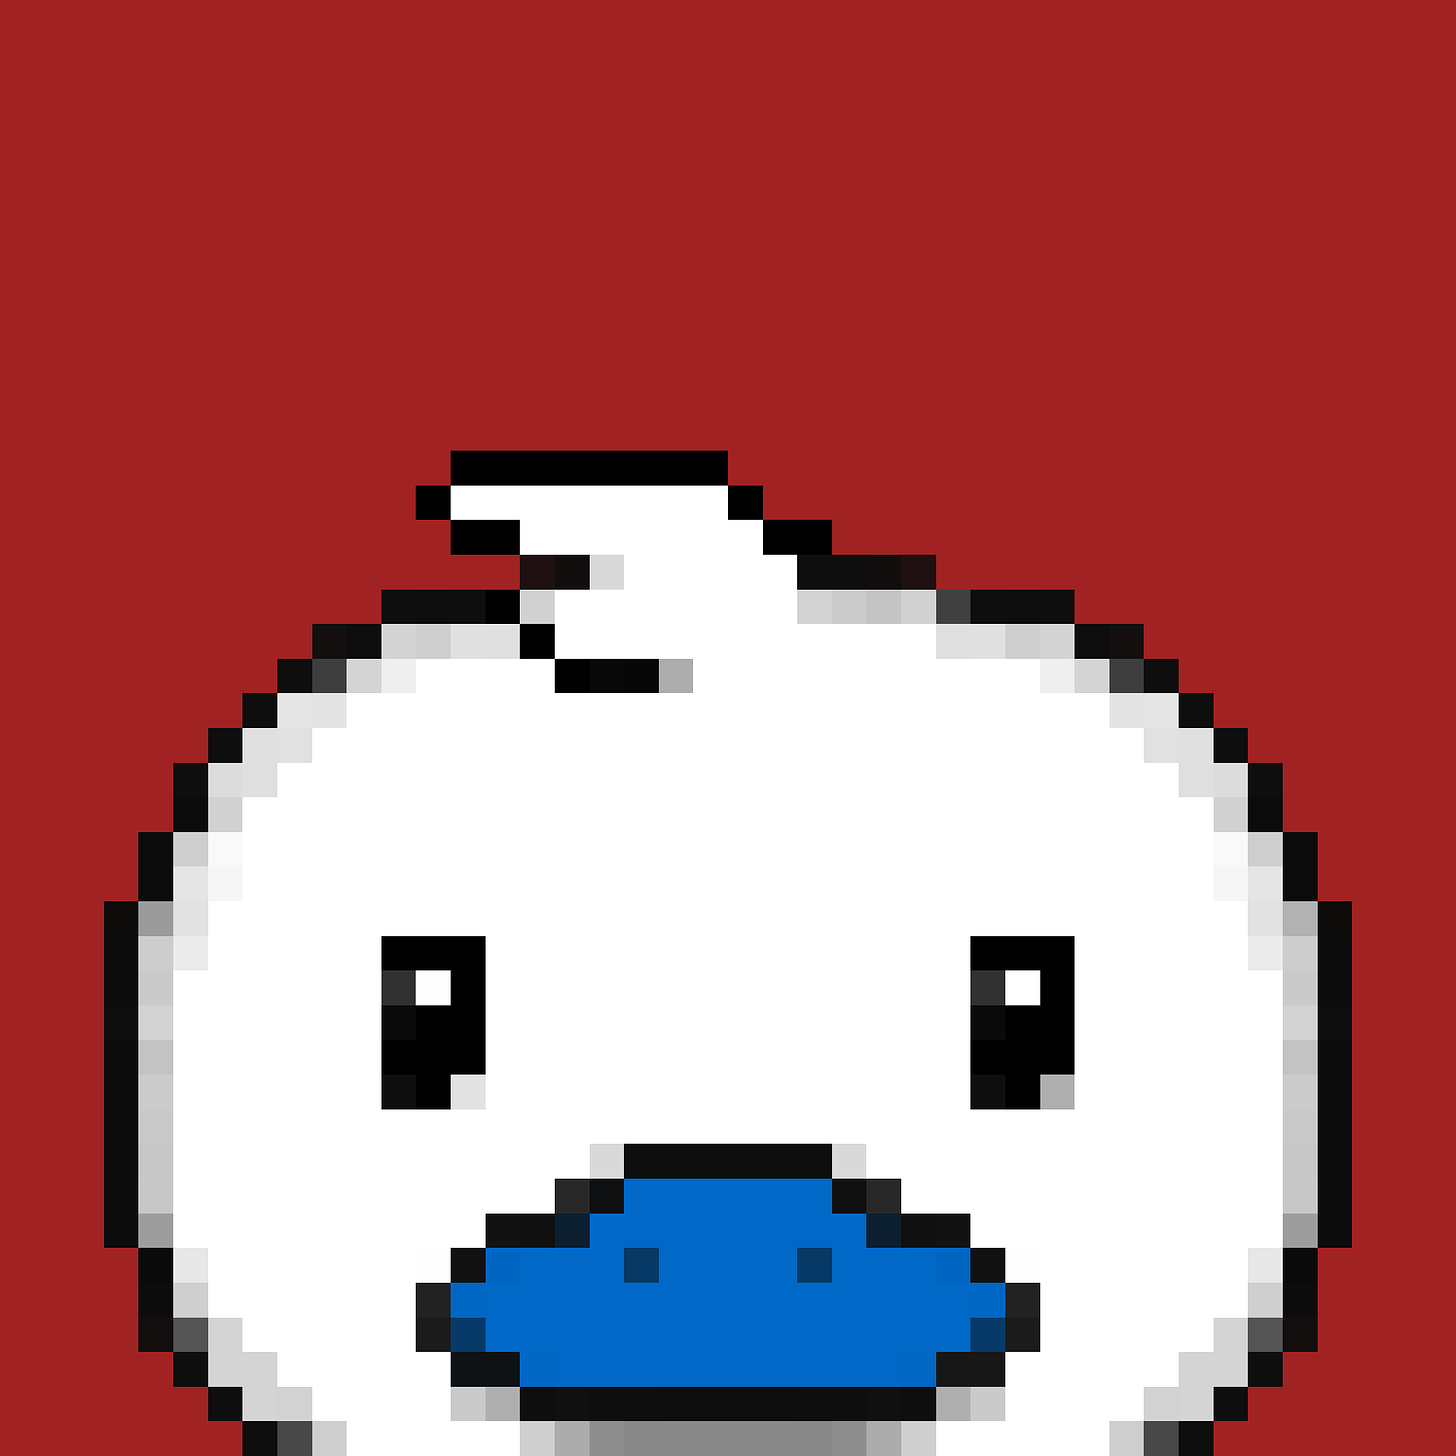 A pixel art white duck with blue bill on red background